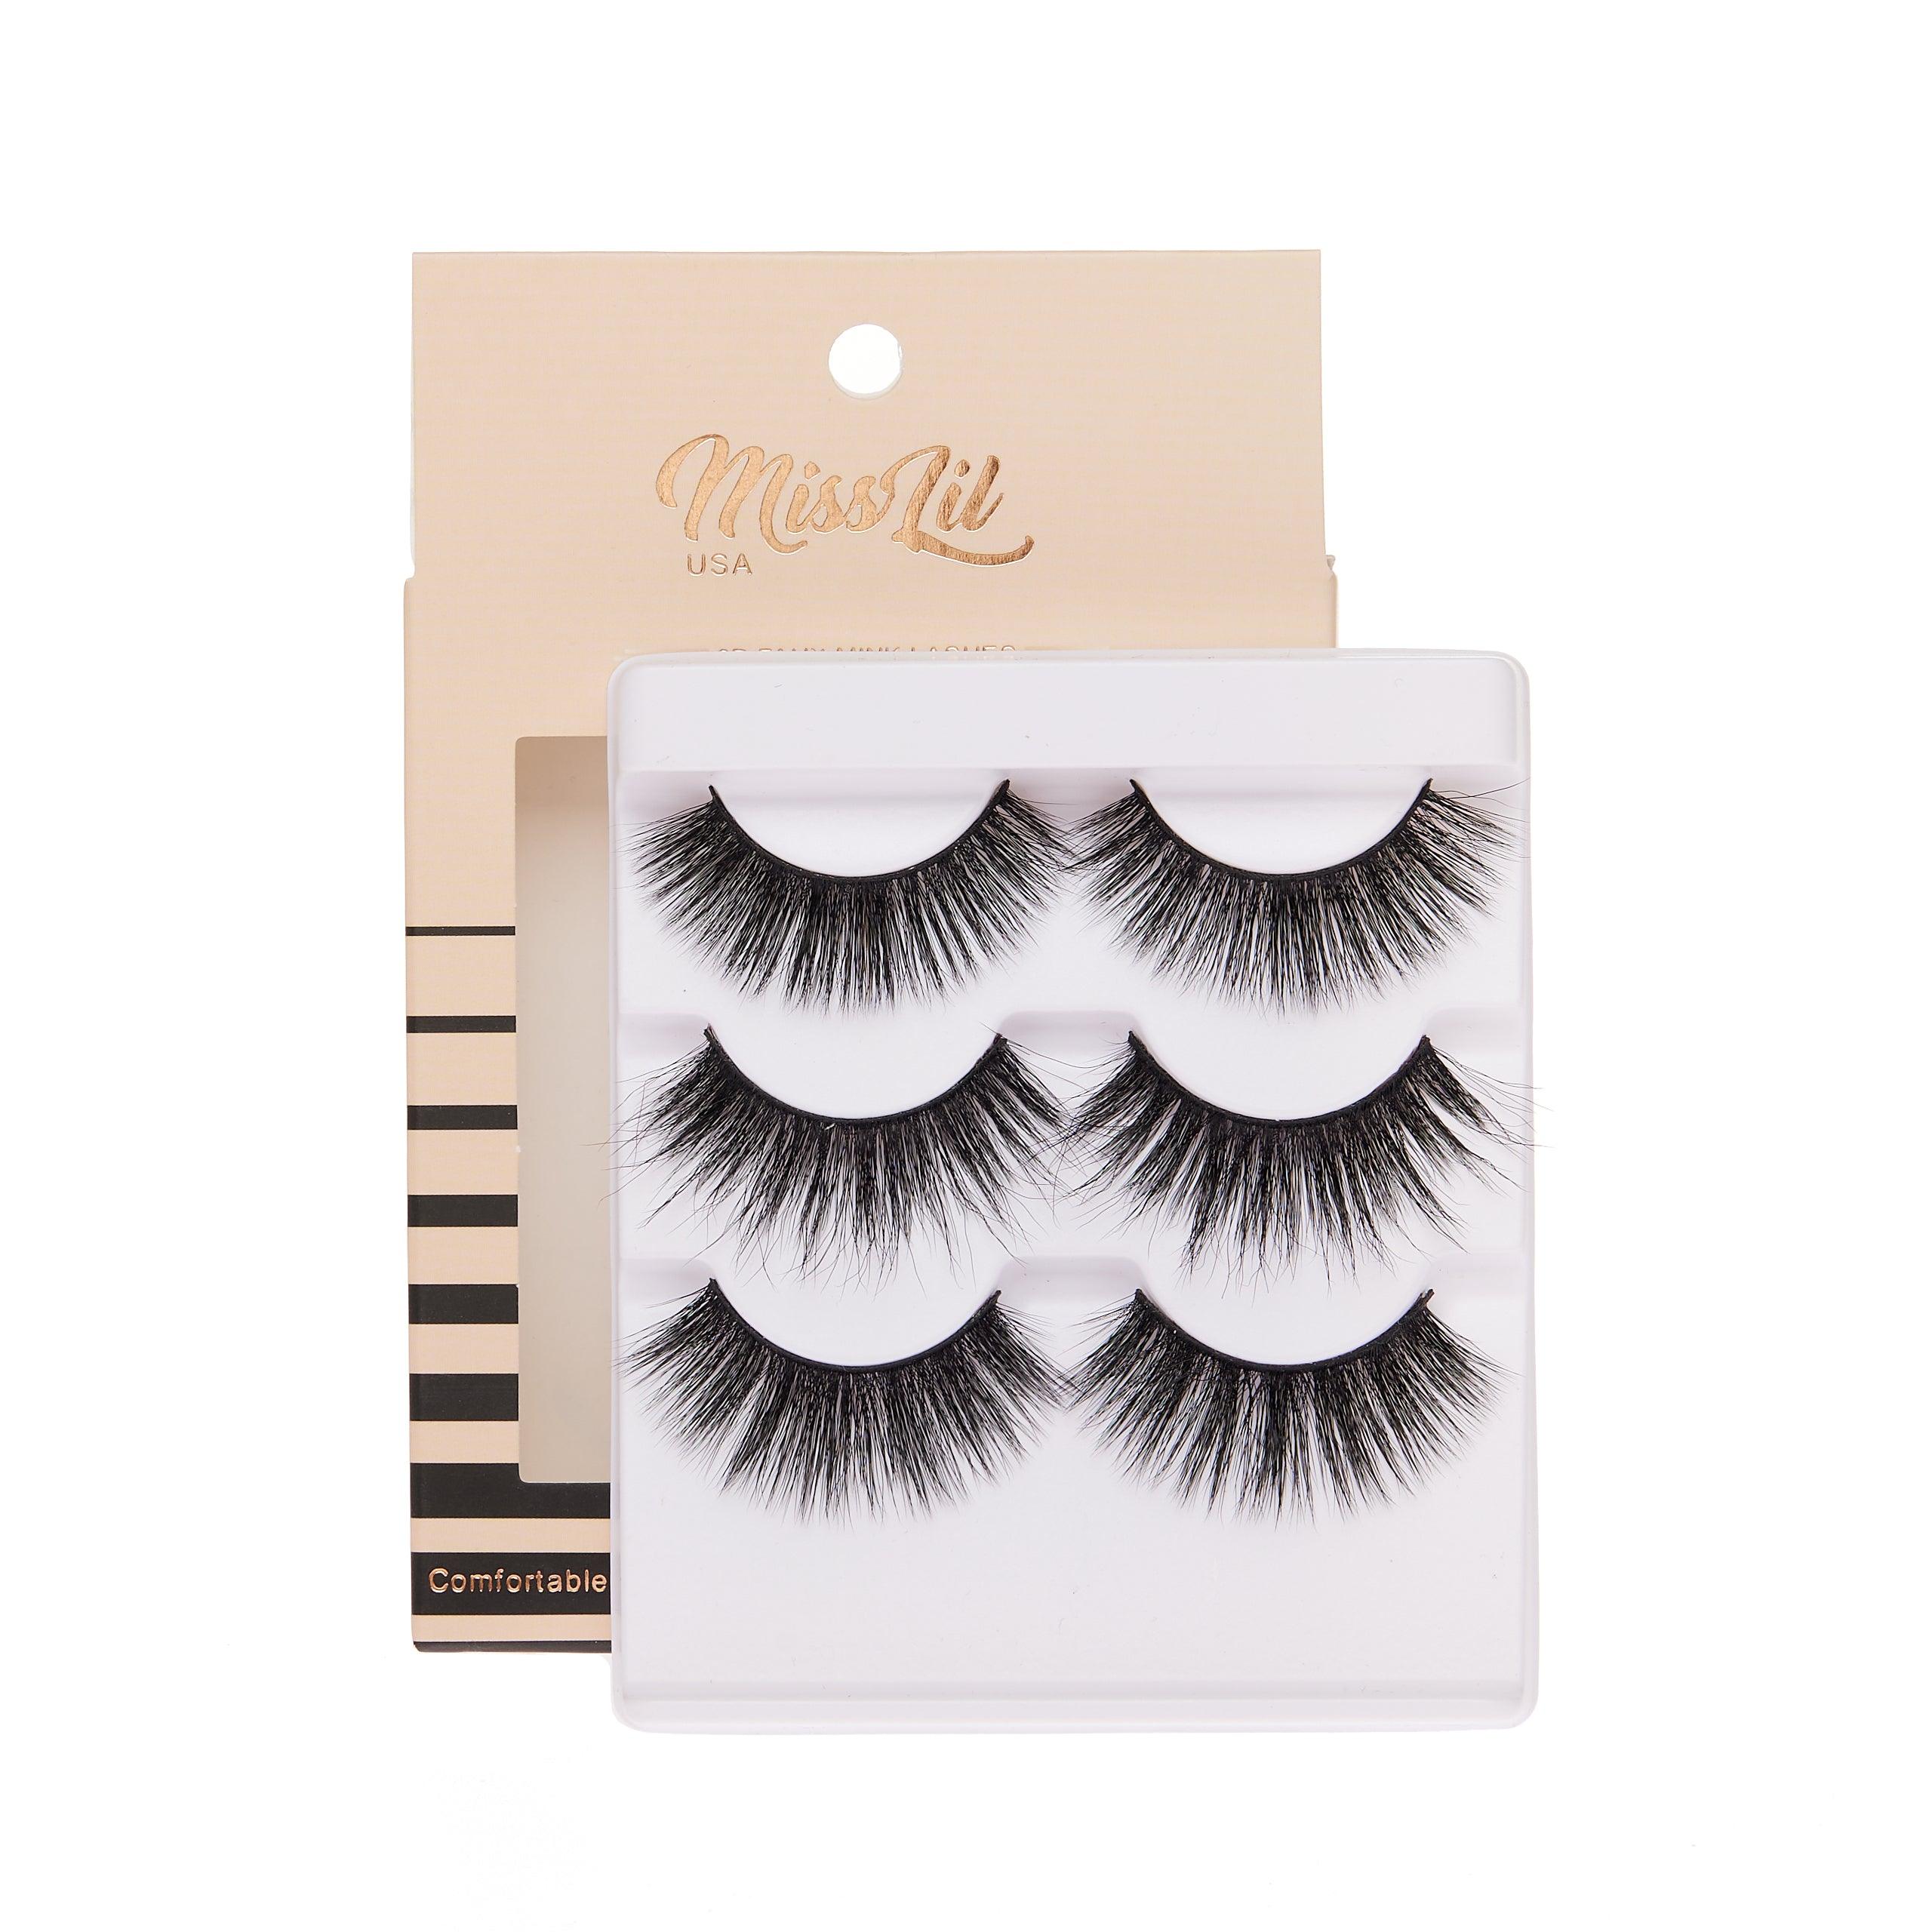 3-Pair Faux 9D Mink Eyelashes - Luxury Collection #19 - Pack of 3 - Miss Lil USA